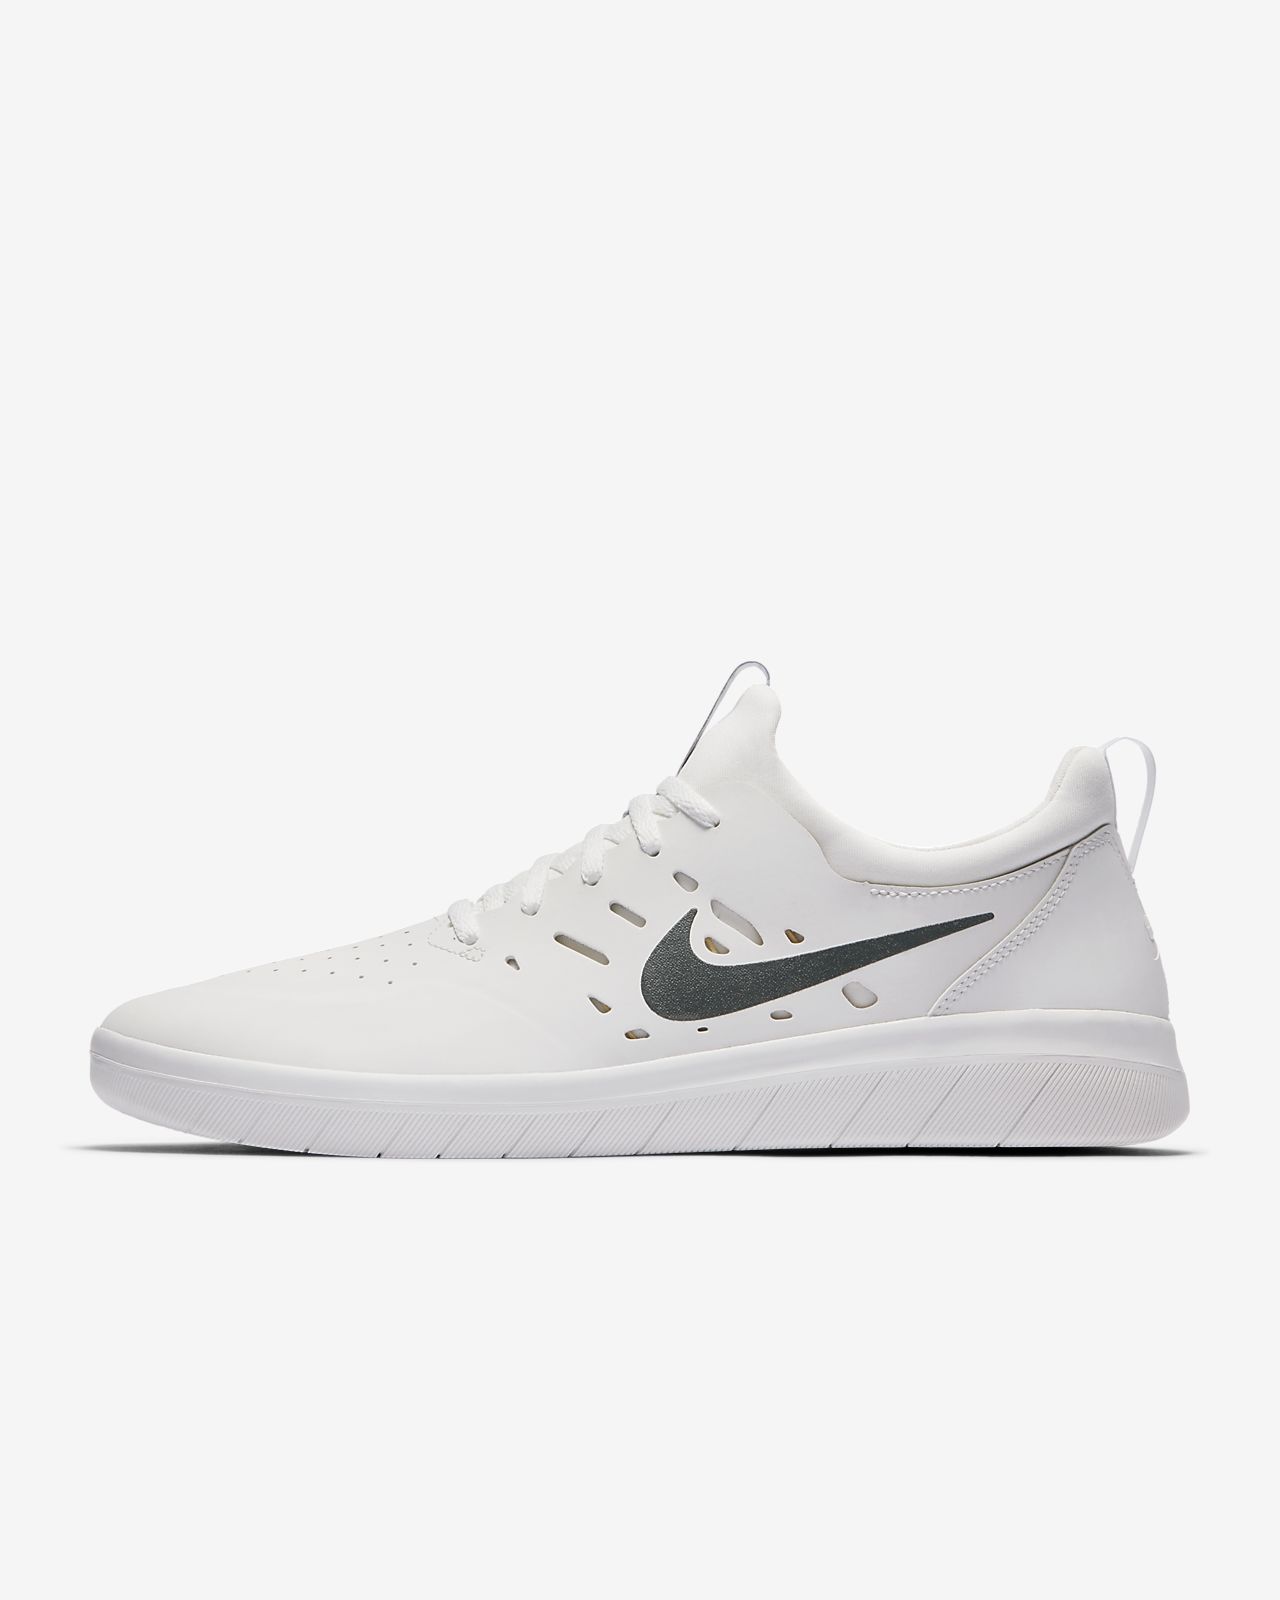 Nike Skating Shoes Online Shop, UP TO 69% OFF